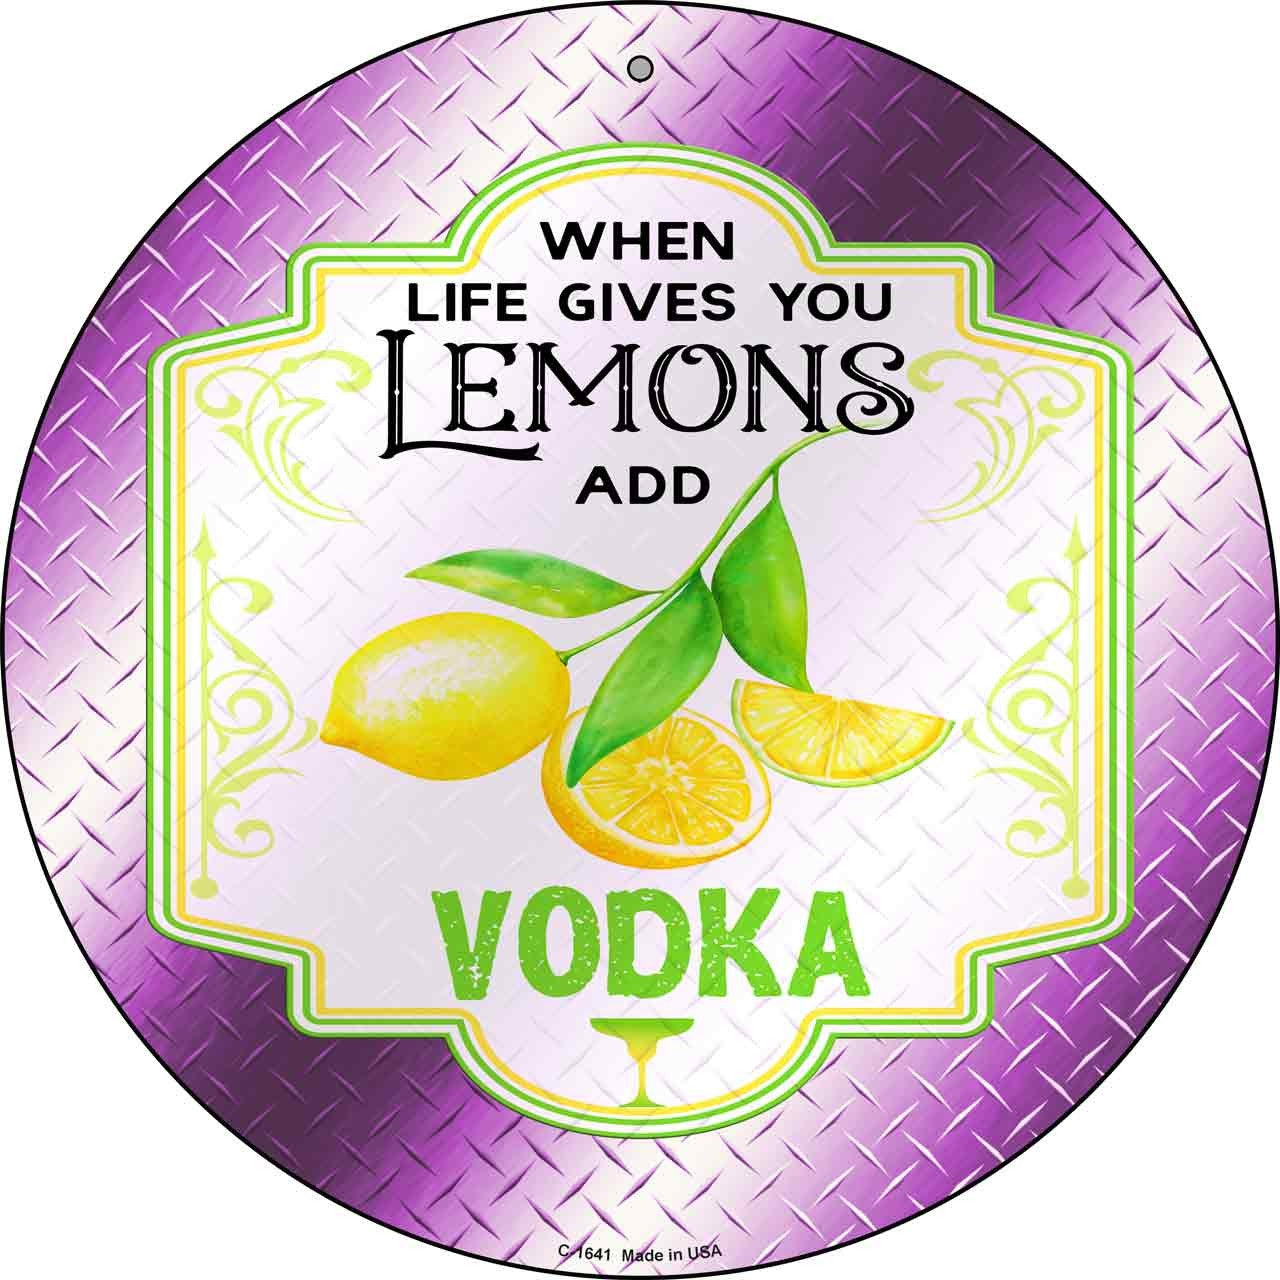 When Life Gives You Lemons Add Vodka Round Metal Circle Sign / Plaque